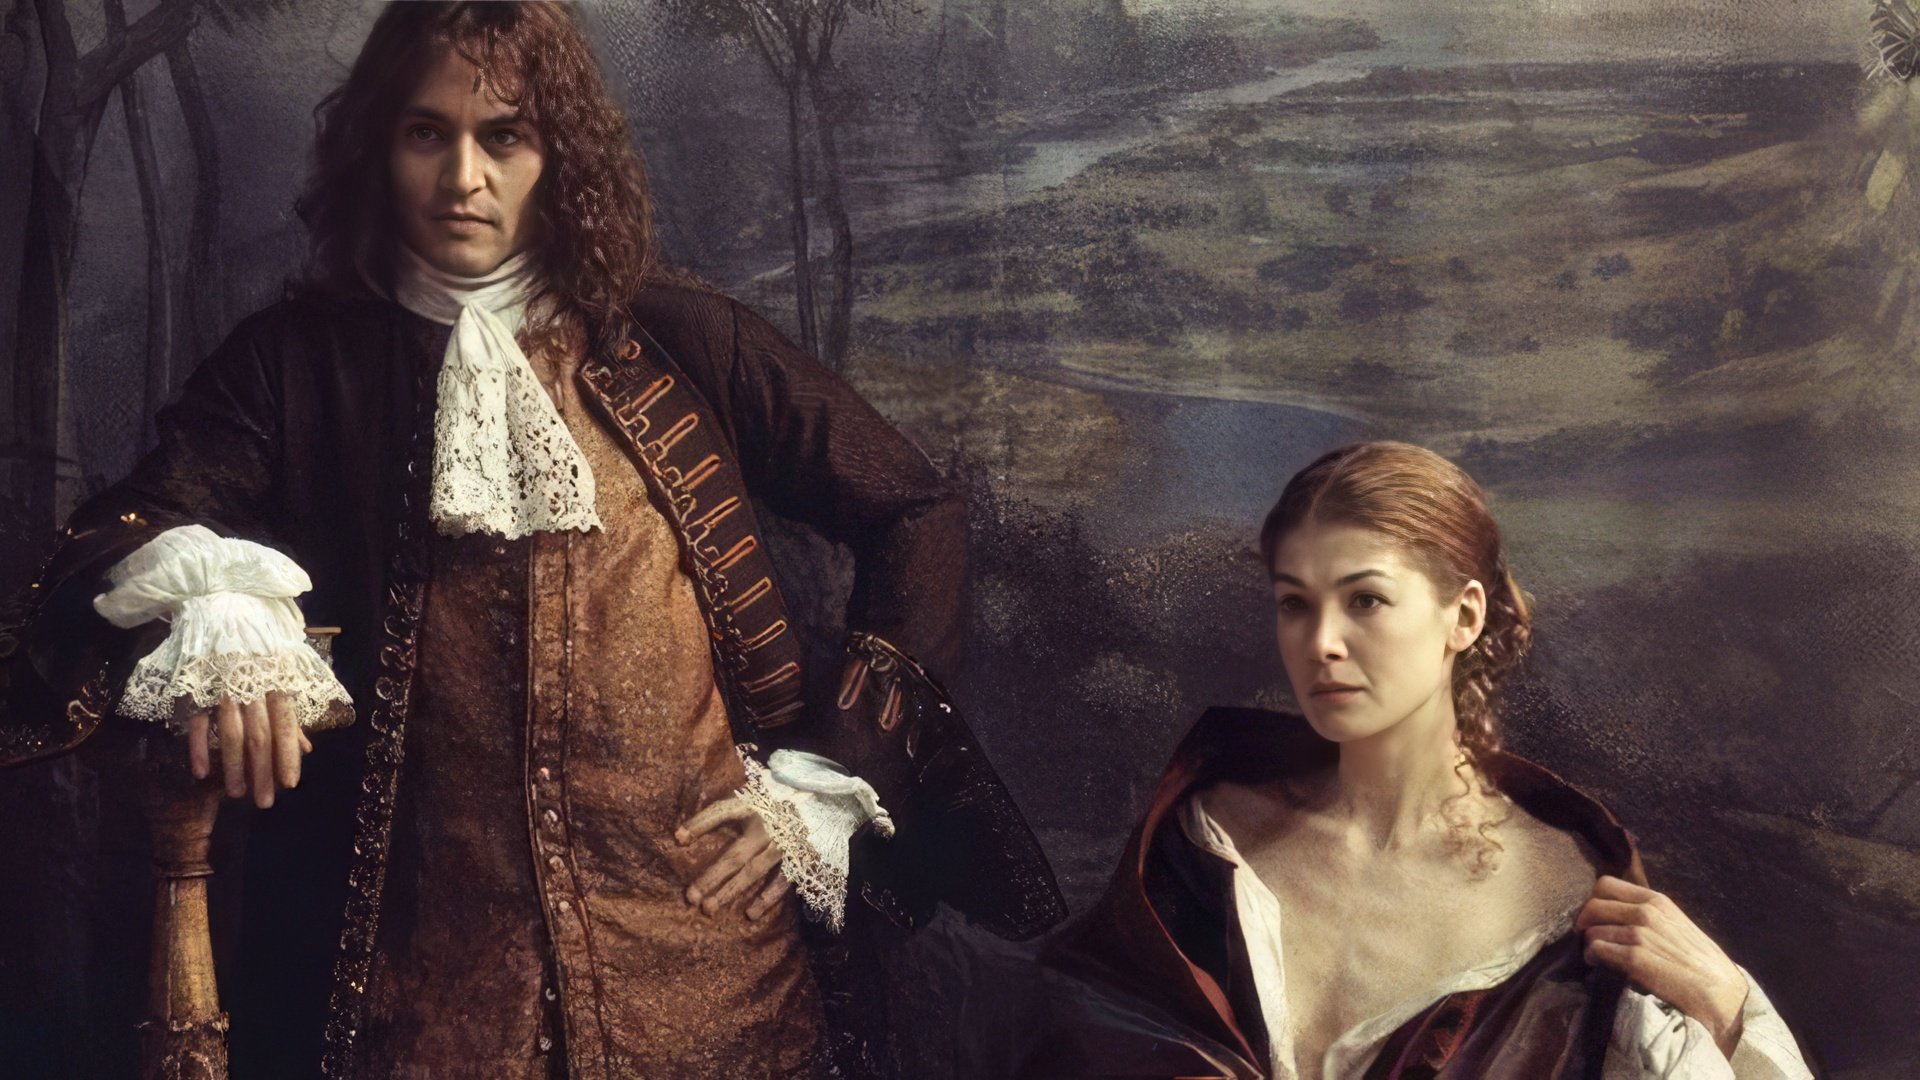 Rosamund Pike and Johnny Depp in The Libertine